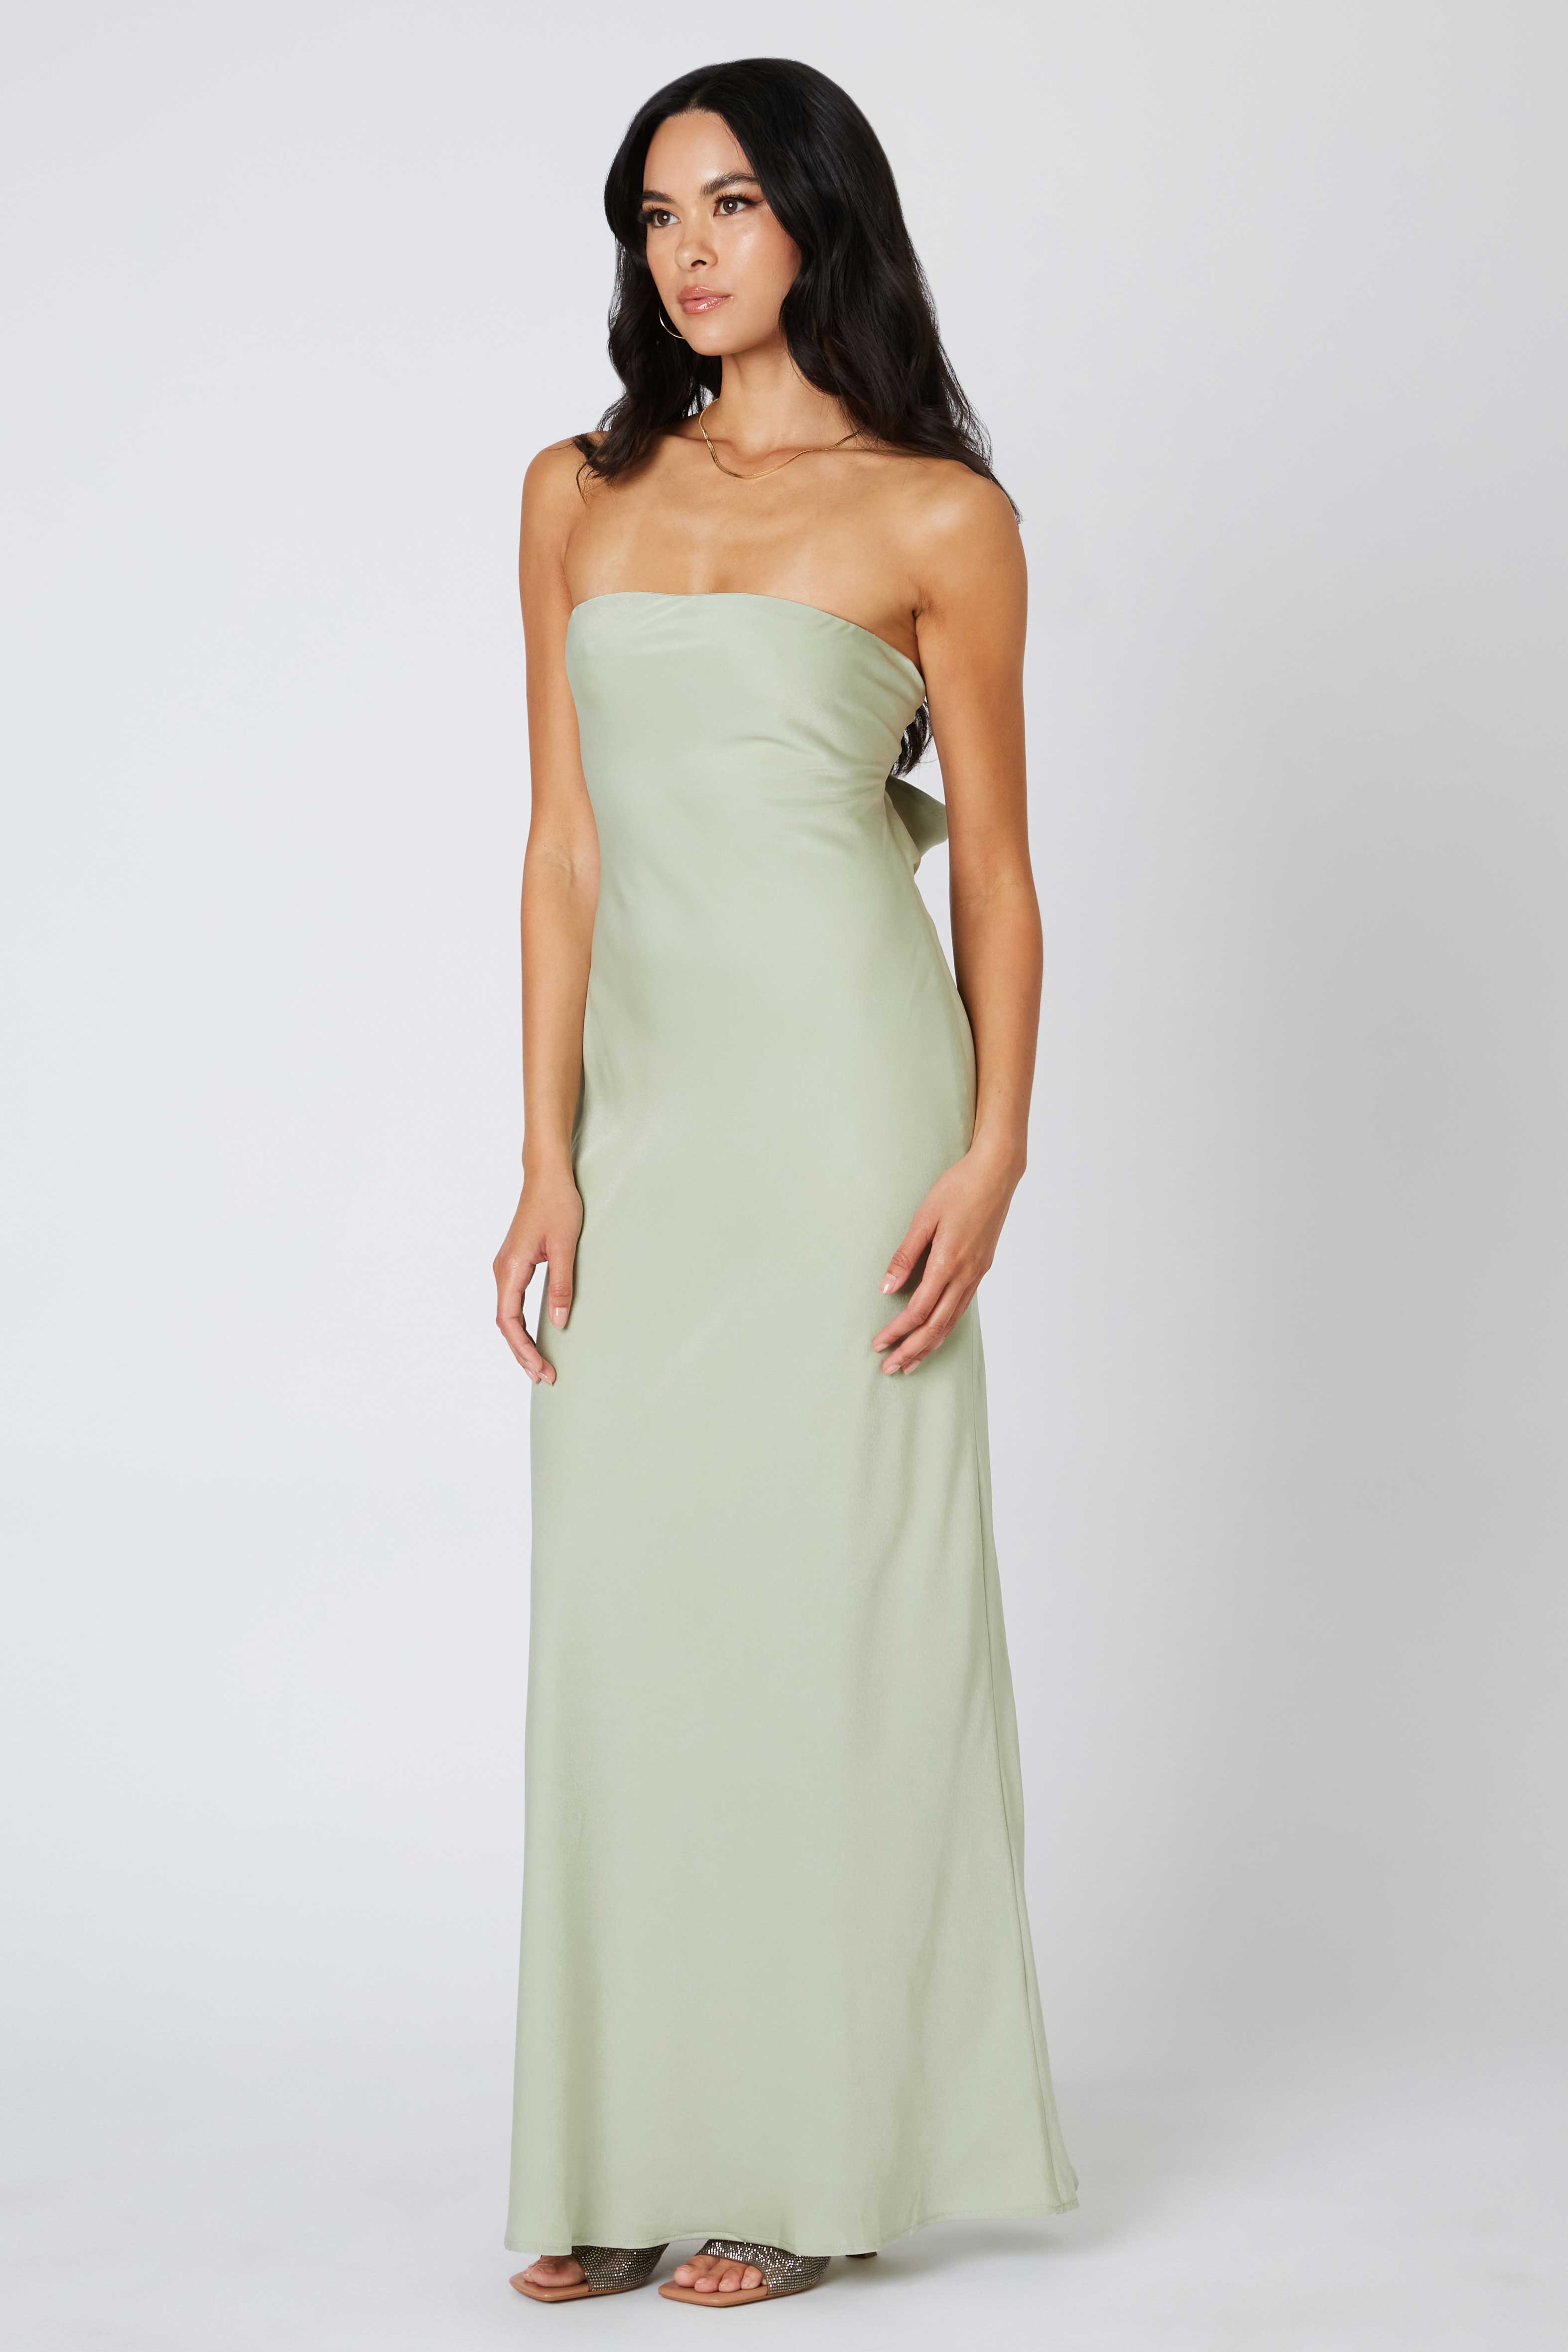 Tie-Back Strapless Maxi Dress in Sage Side View